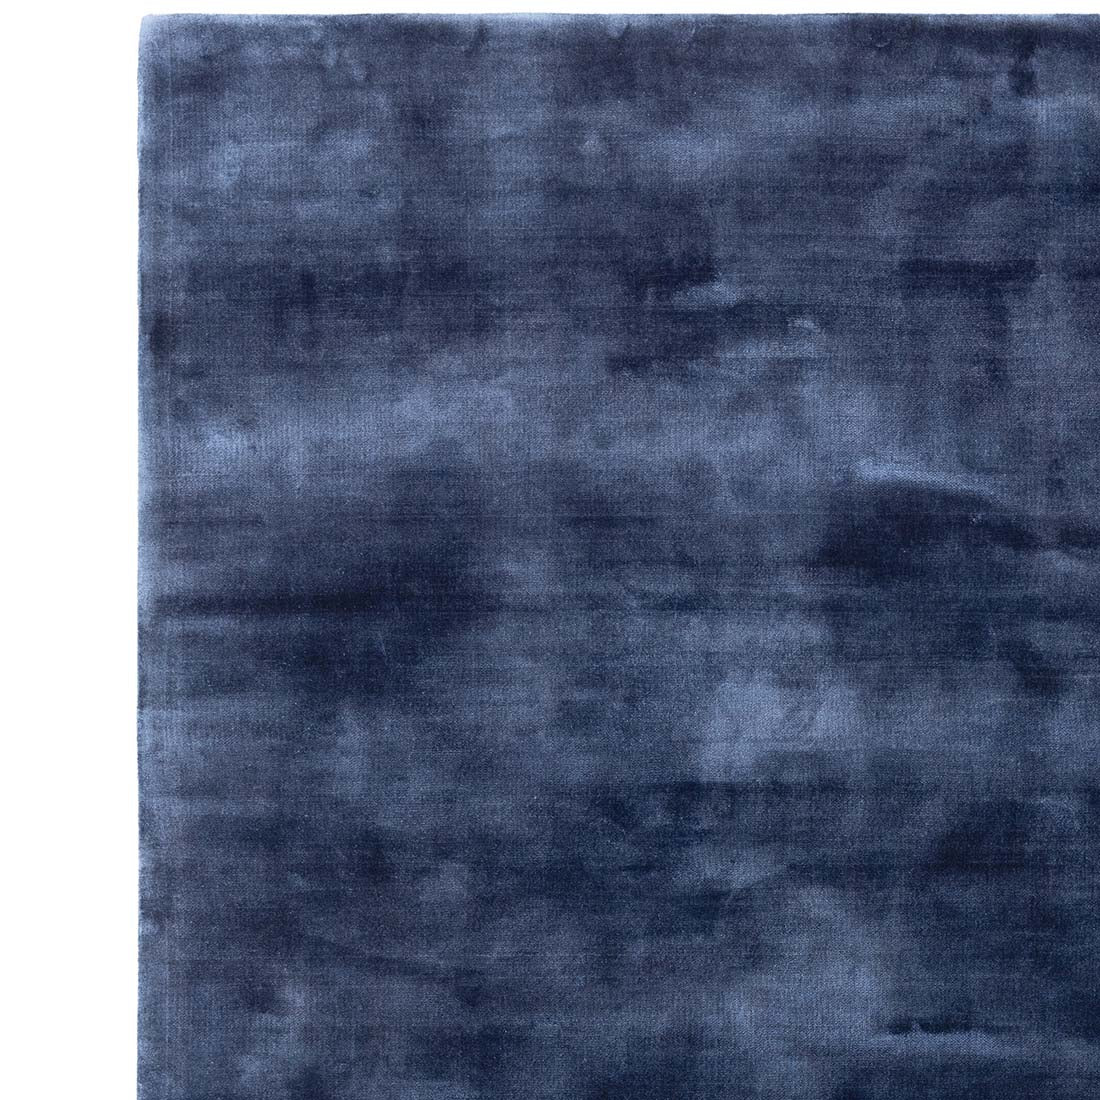 shiny blue modern rug in a plain style
